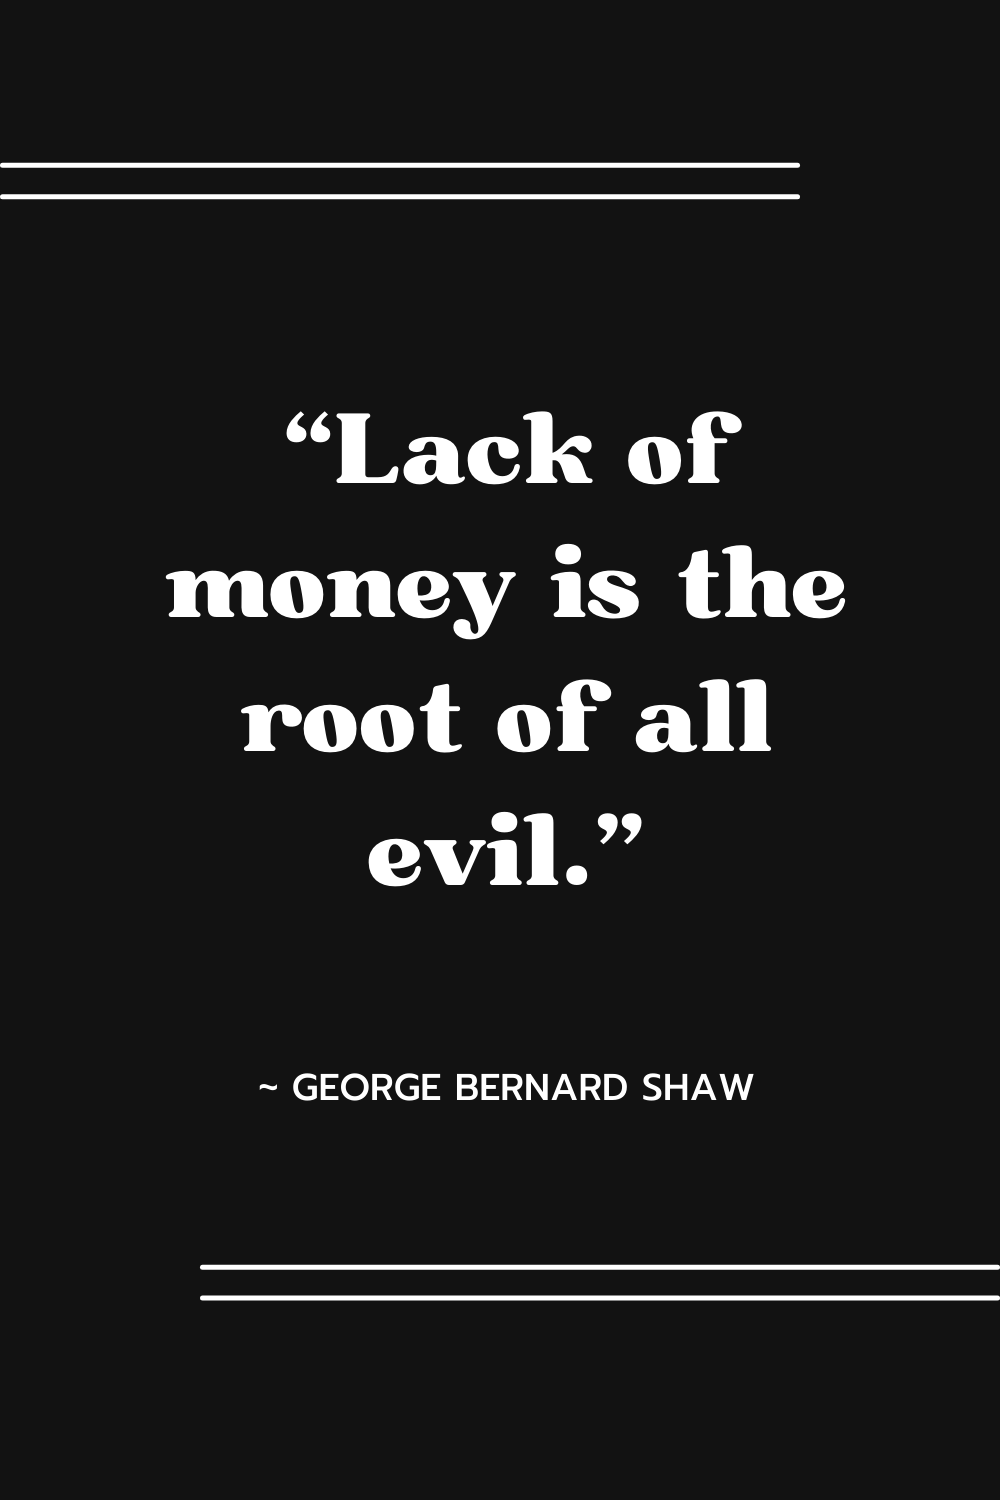 George Bernard Shaw: "Lack of money is the root of all evil."